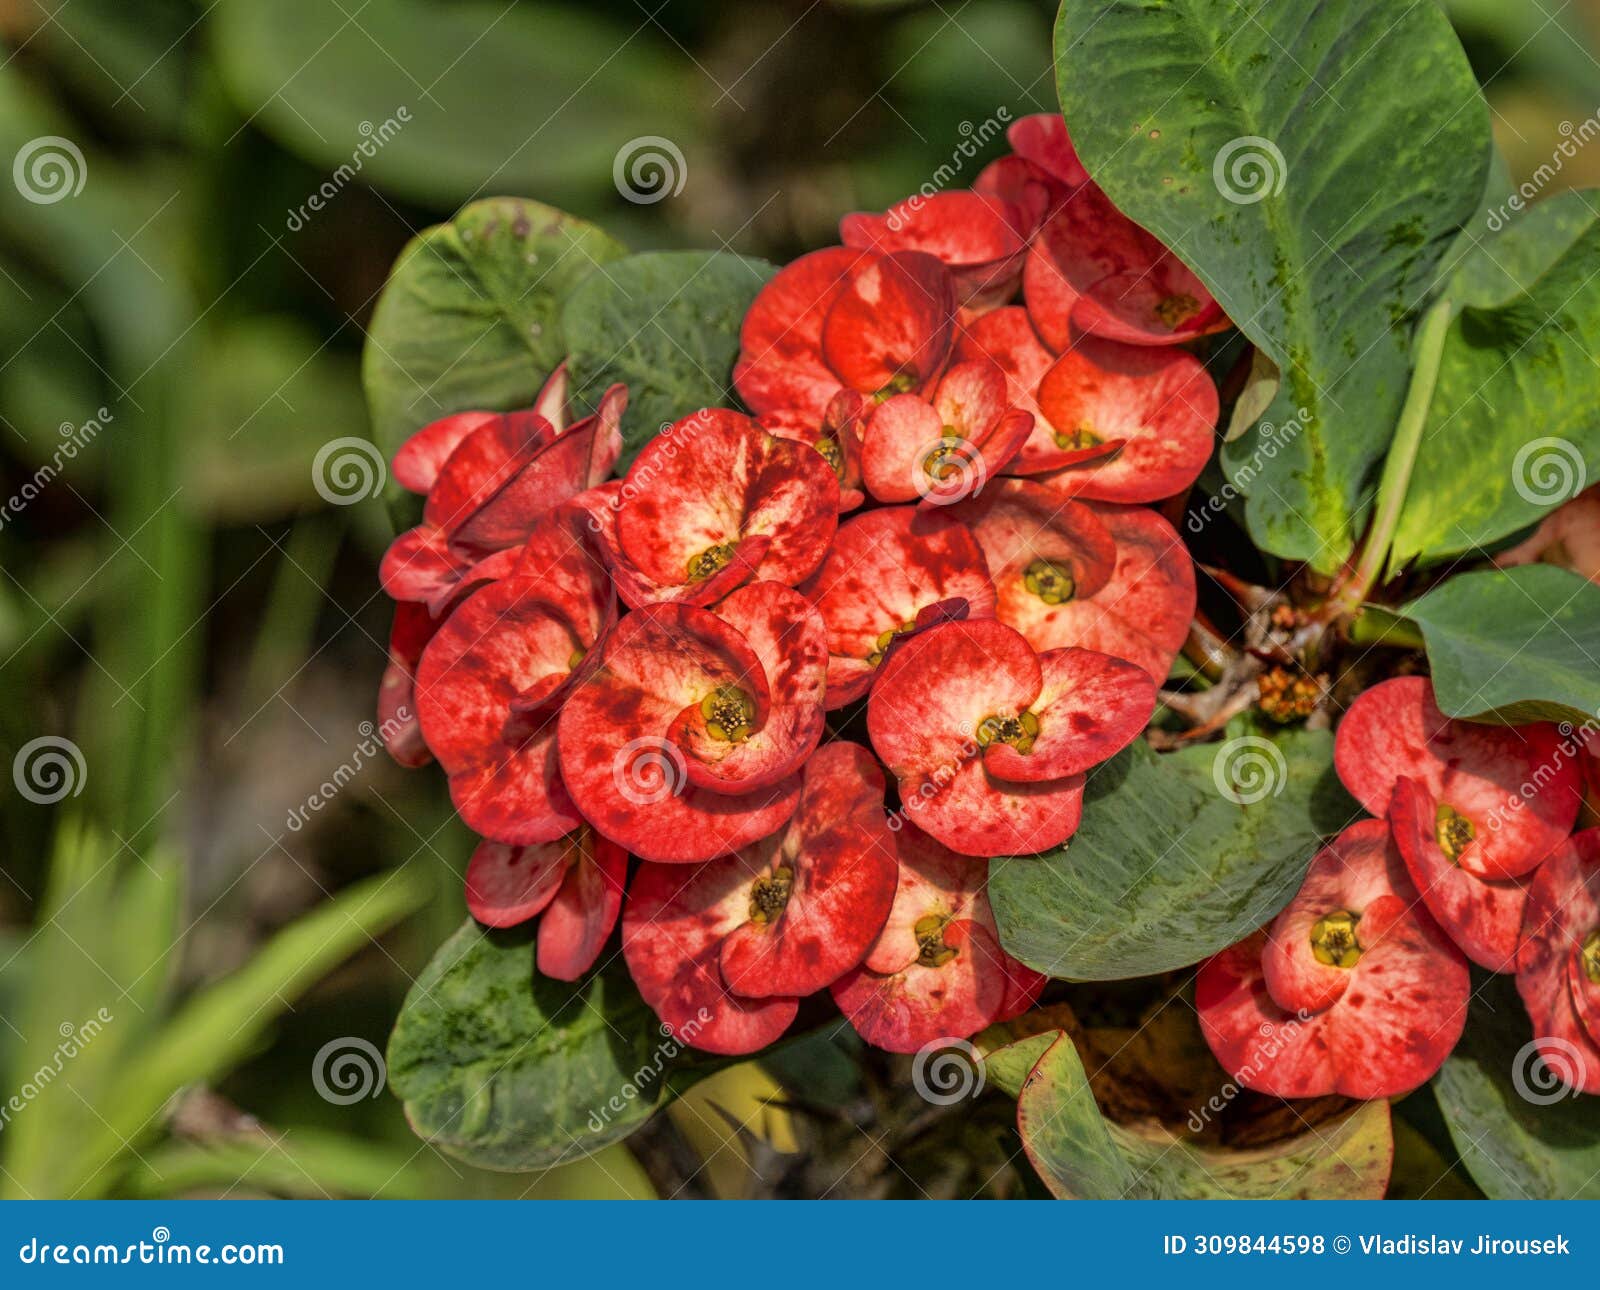 grouping of red flowers in the forest. colombia